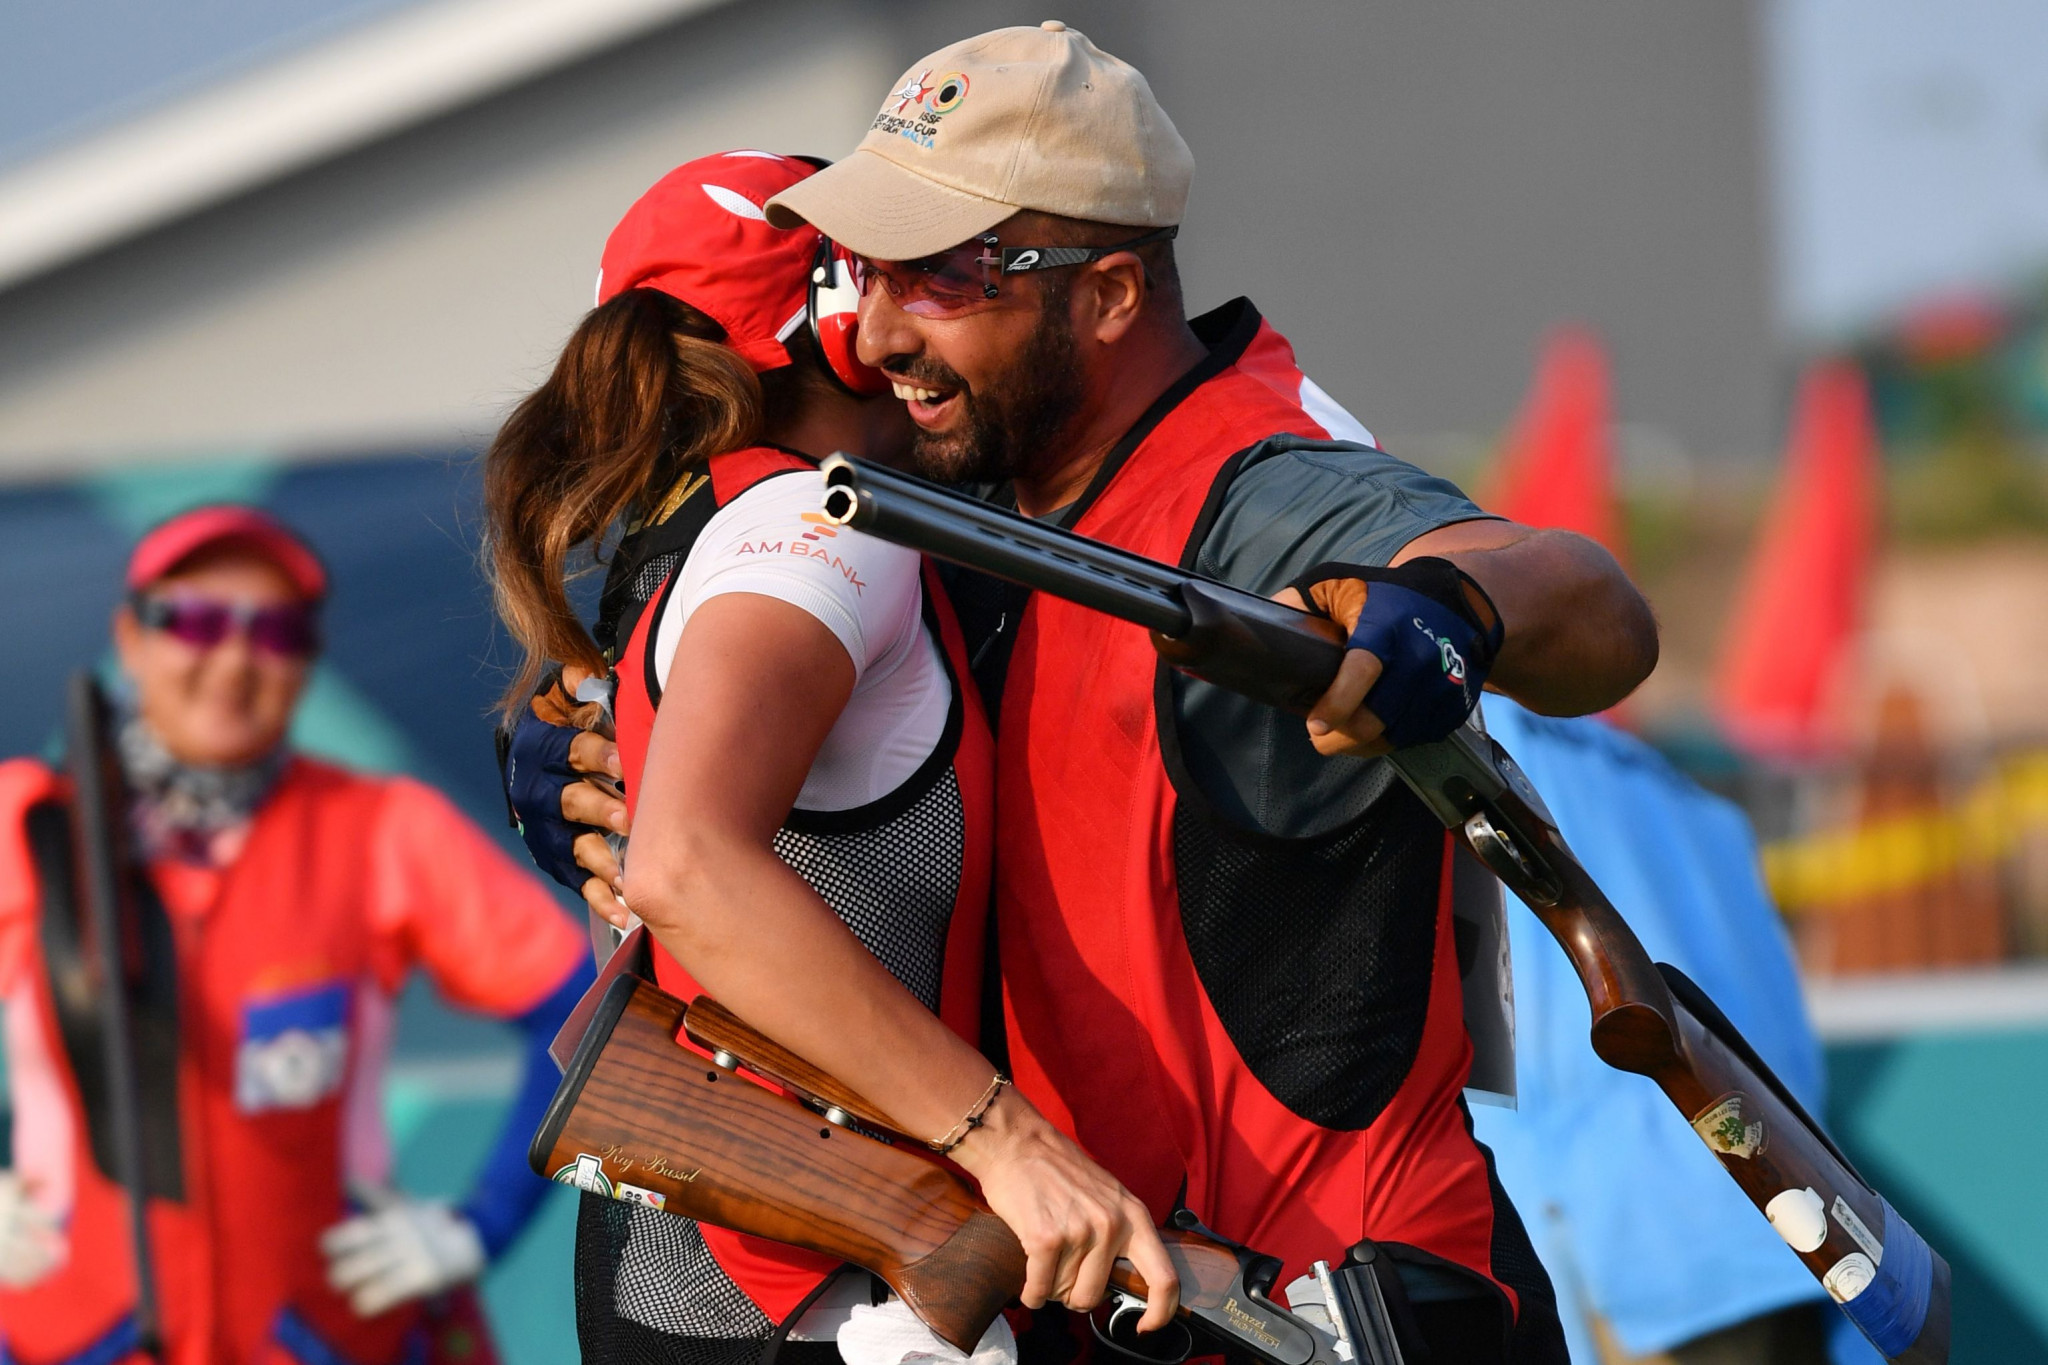 Lebanon's Ray Bassil and Alain
Moussa won the first ever Asian Games gold in the mixed team trap final ©Getty Images